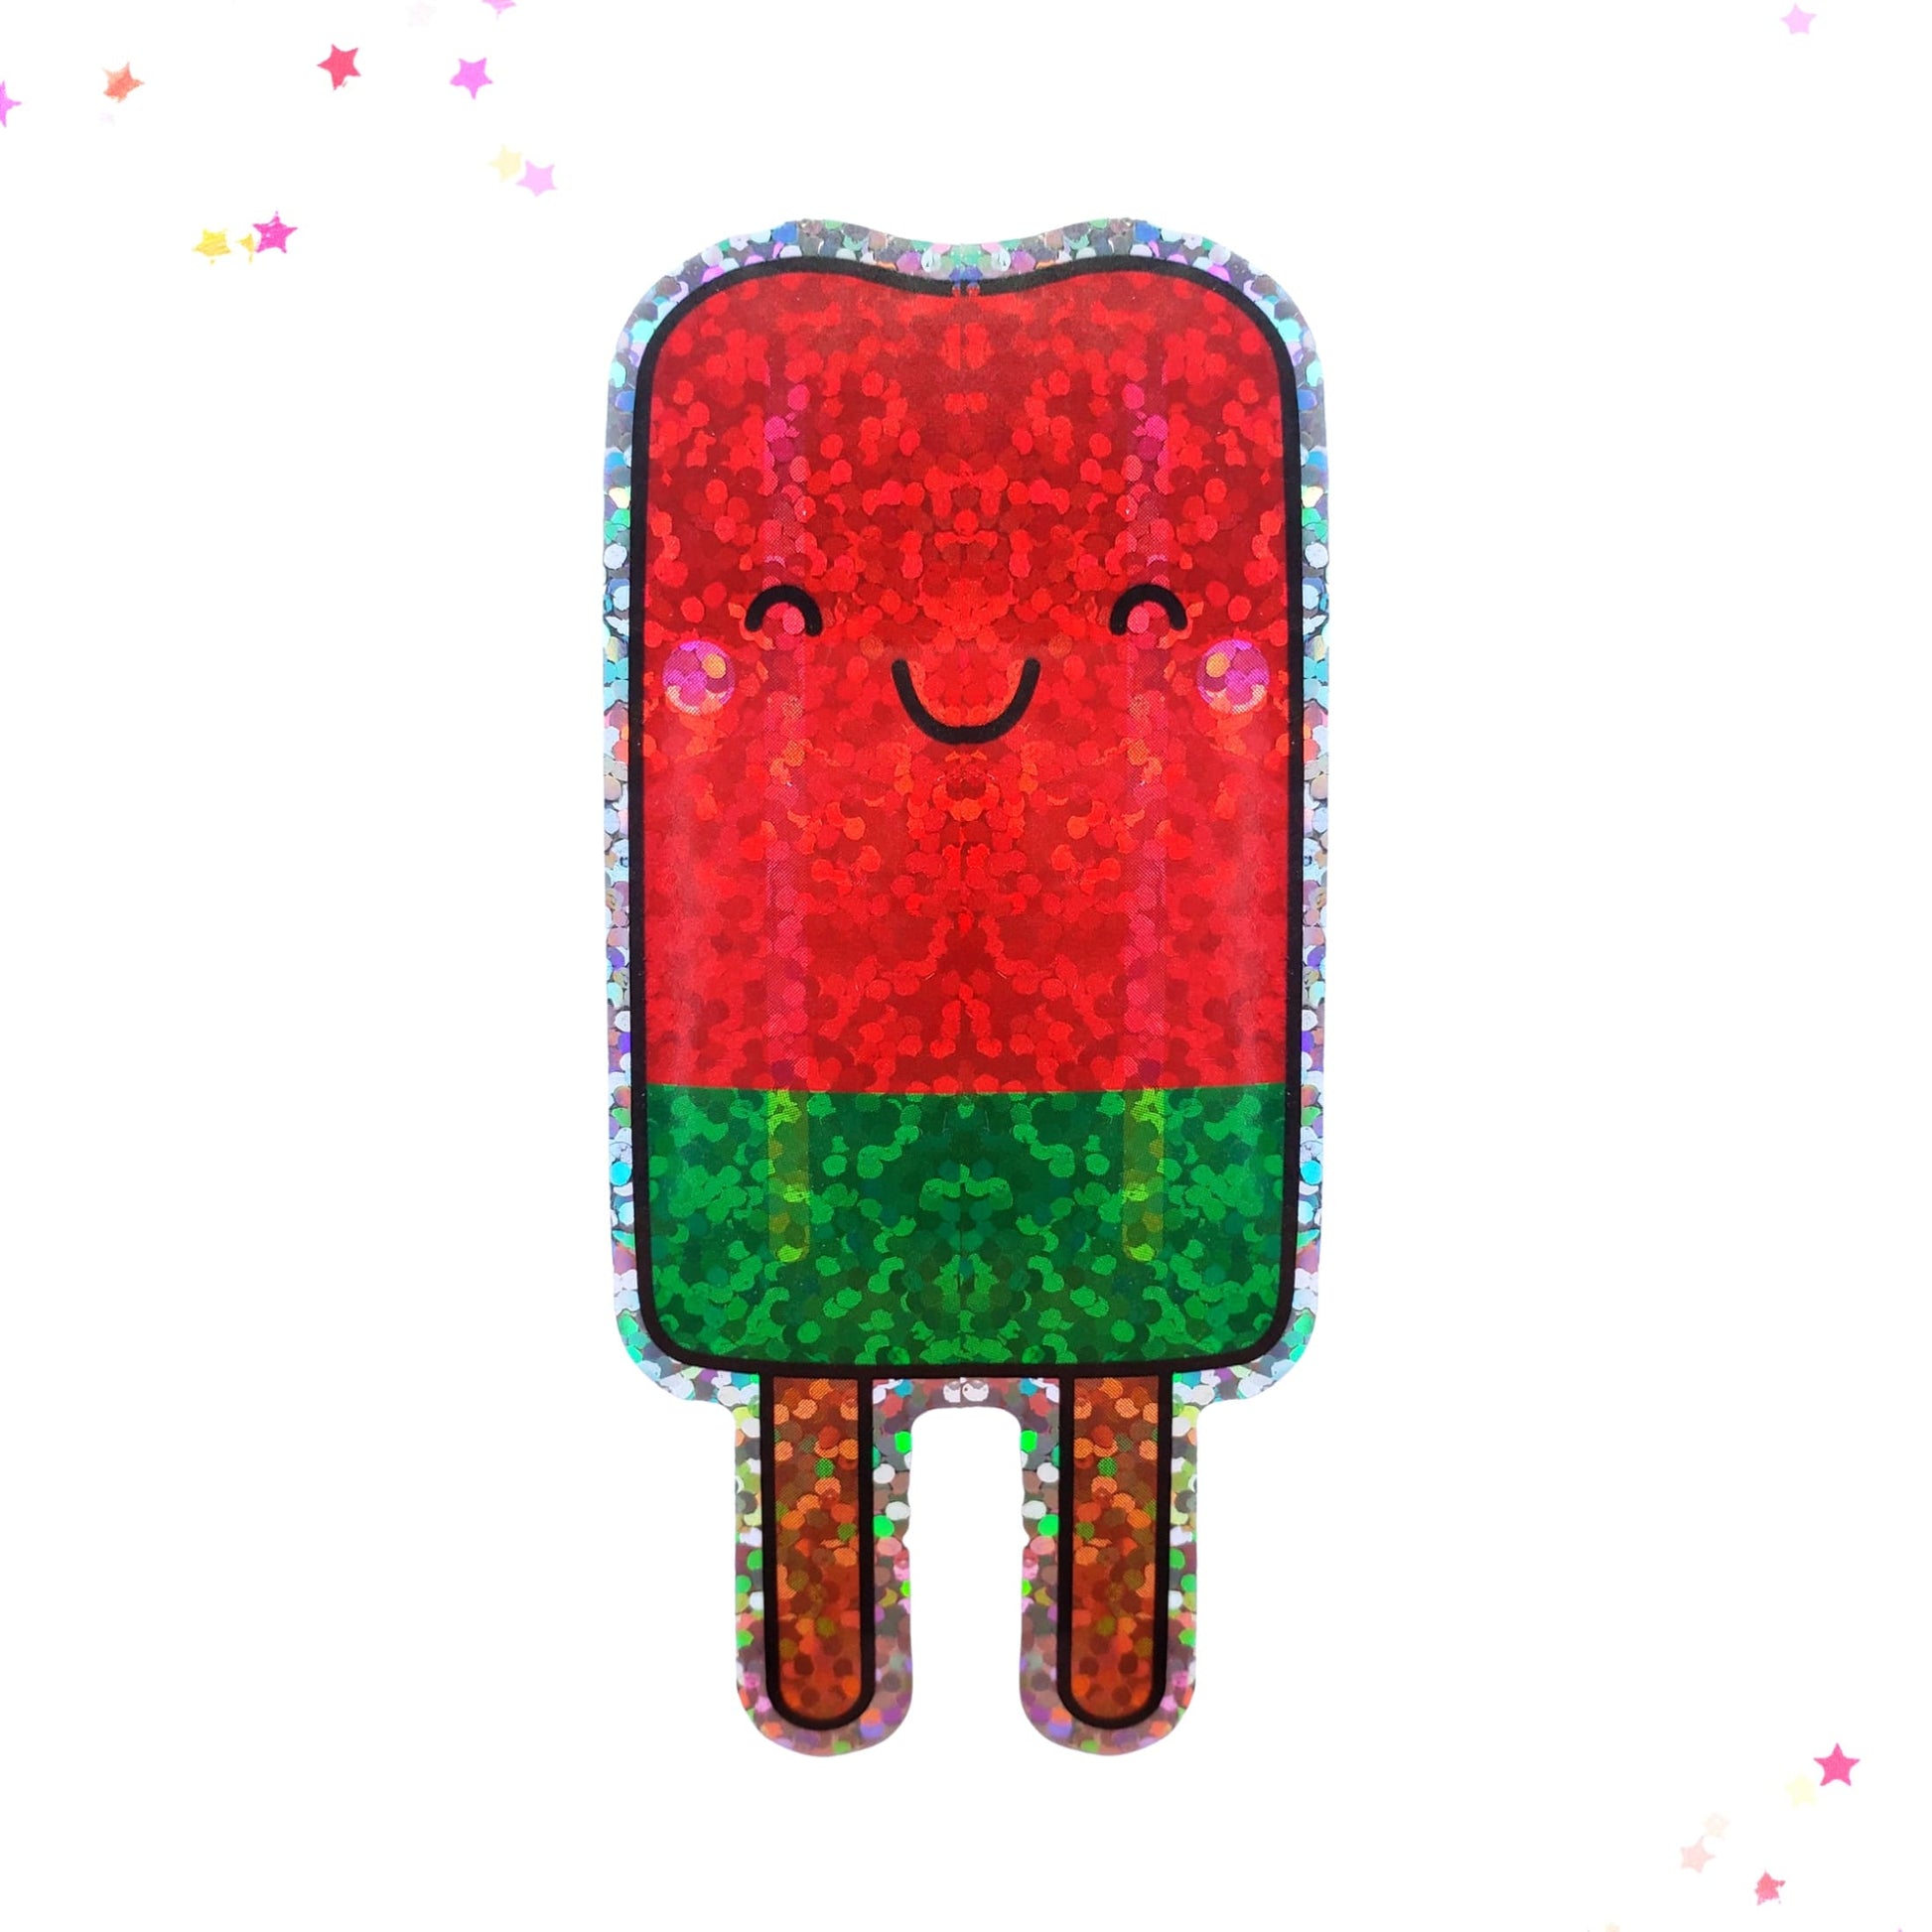 Premium Sticker - Sparkly Holographic Glitter Popsicle from Confetti Kitty, Only 2.00